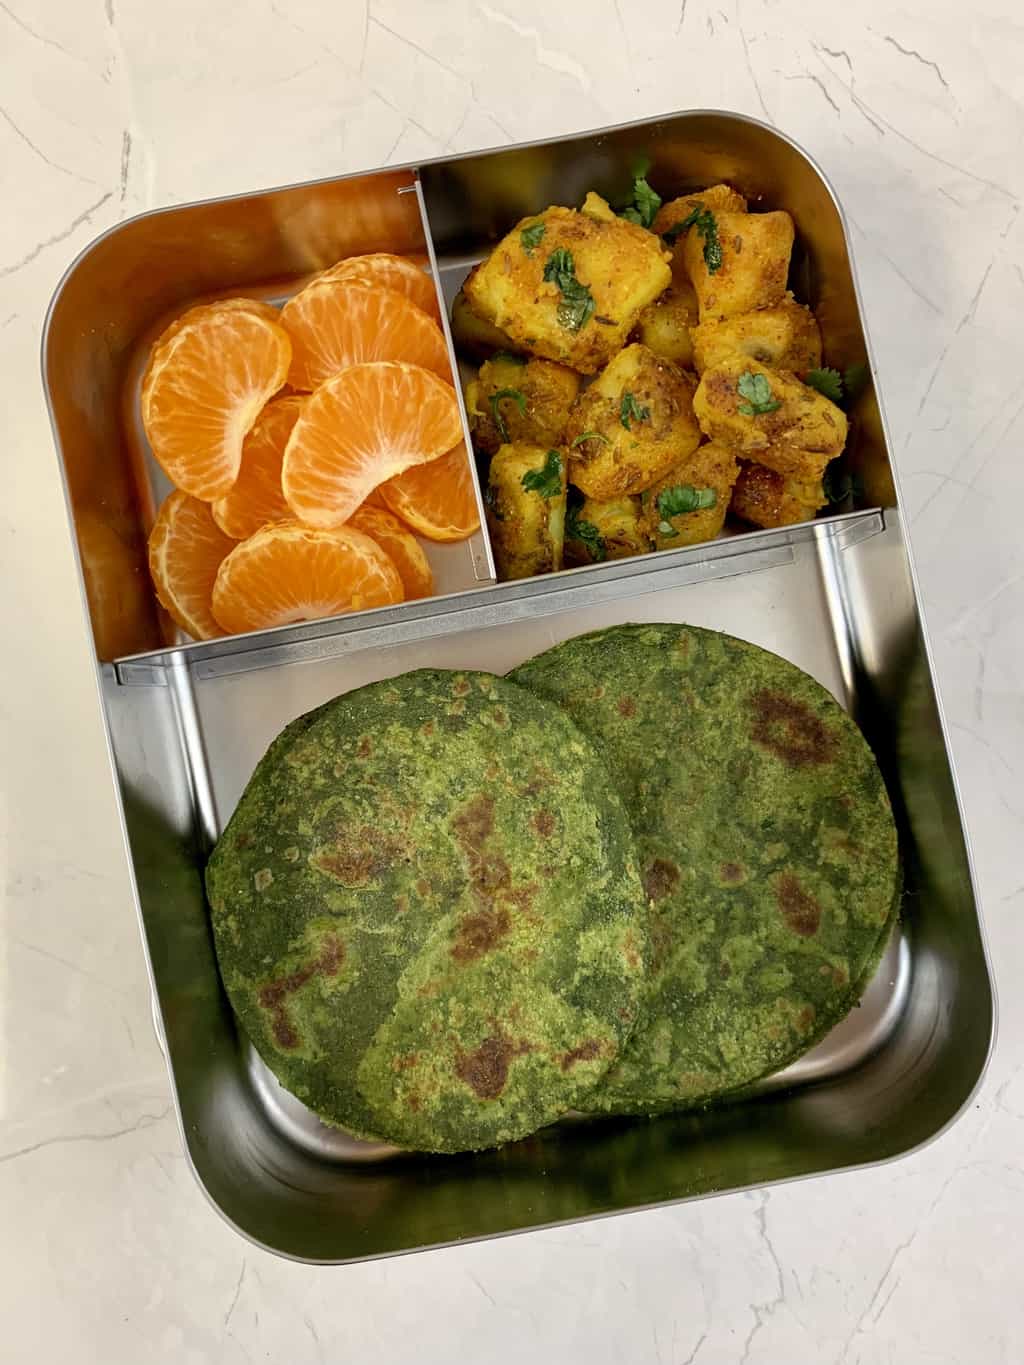 Palak Chapati + Jeera Aloo + Orange|Another quick and healthy lunchbox that cna ve prepared under 30 minutes|indianveggiedelight.com